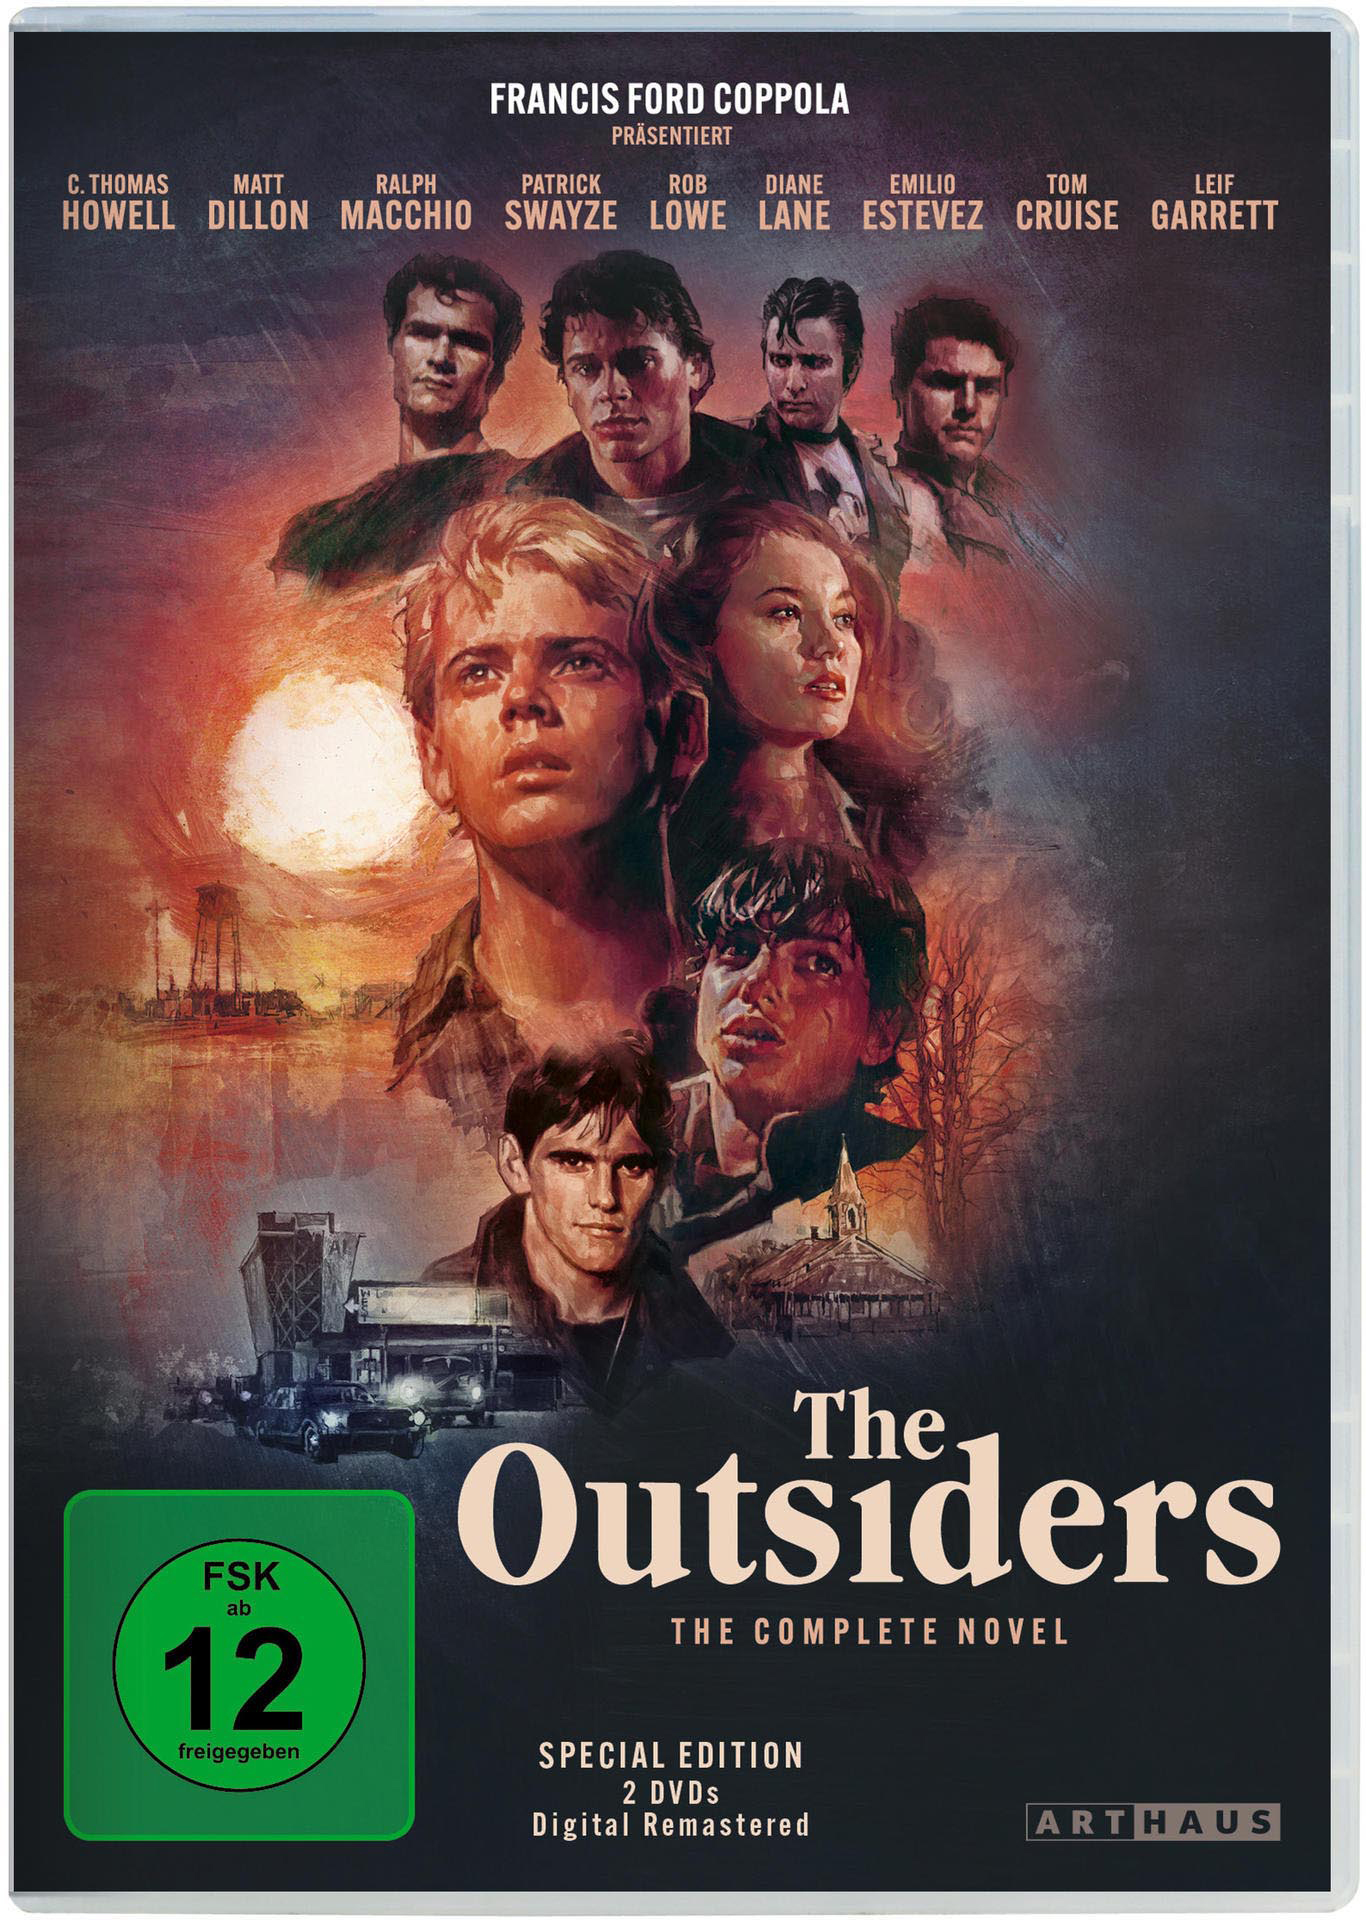 The DVD Outsiders